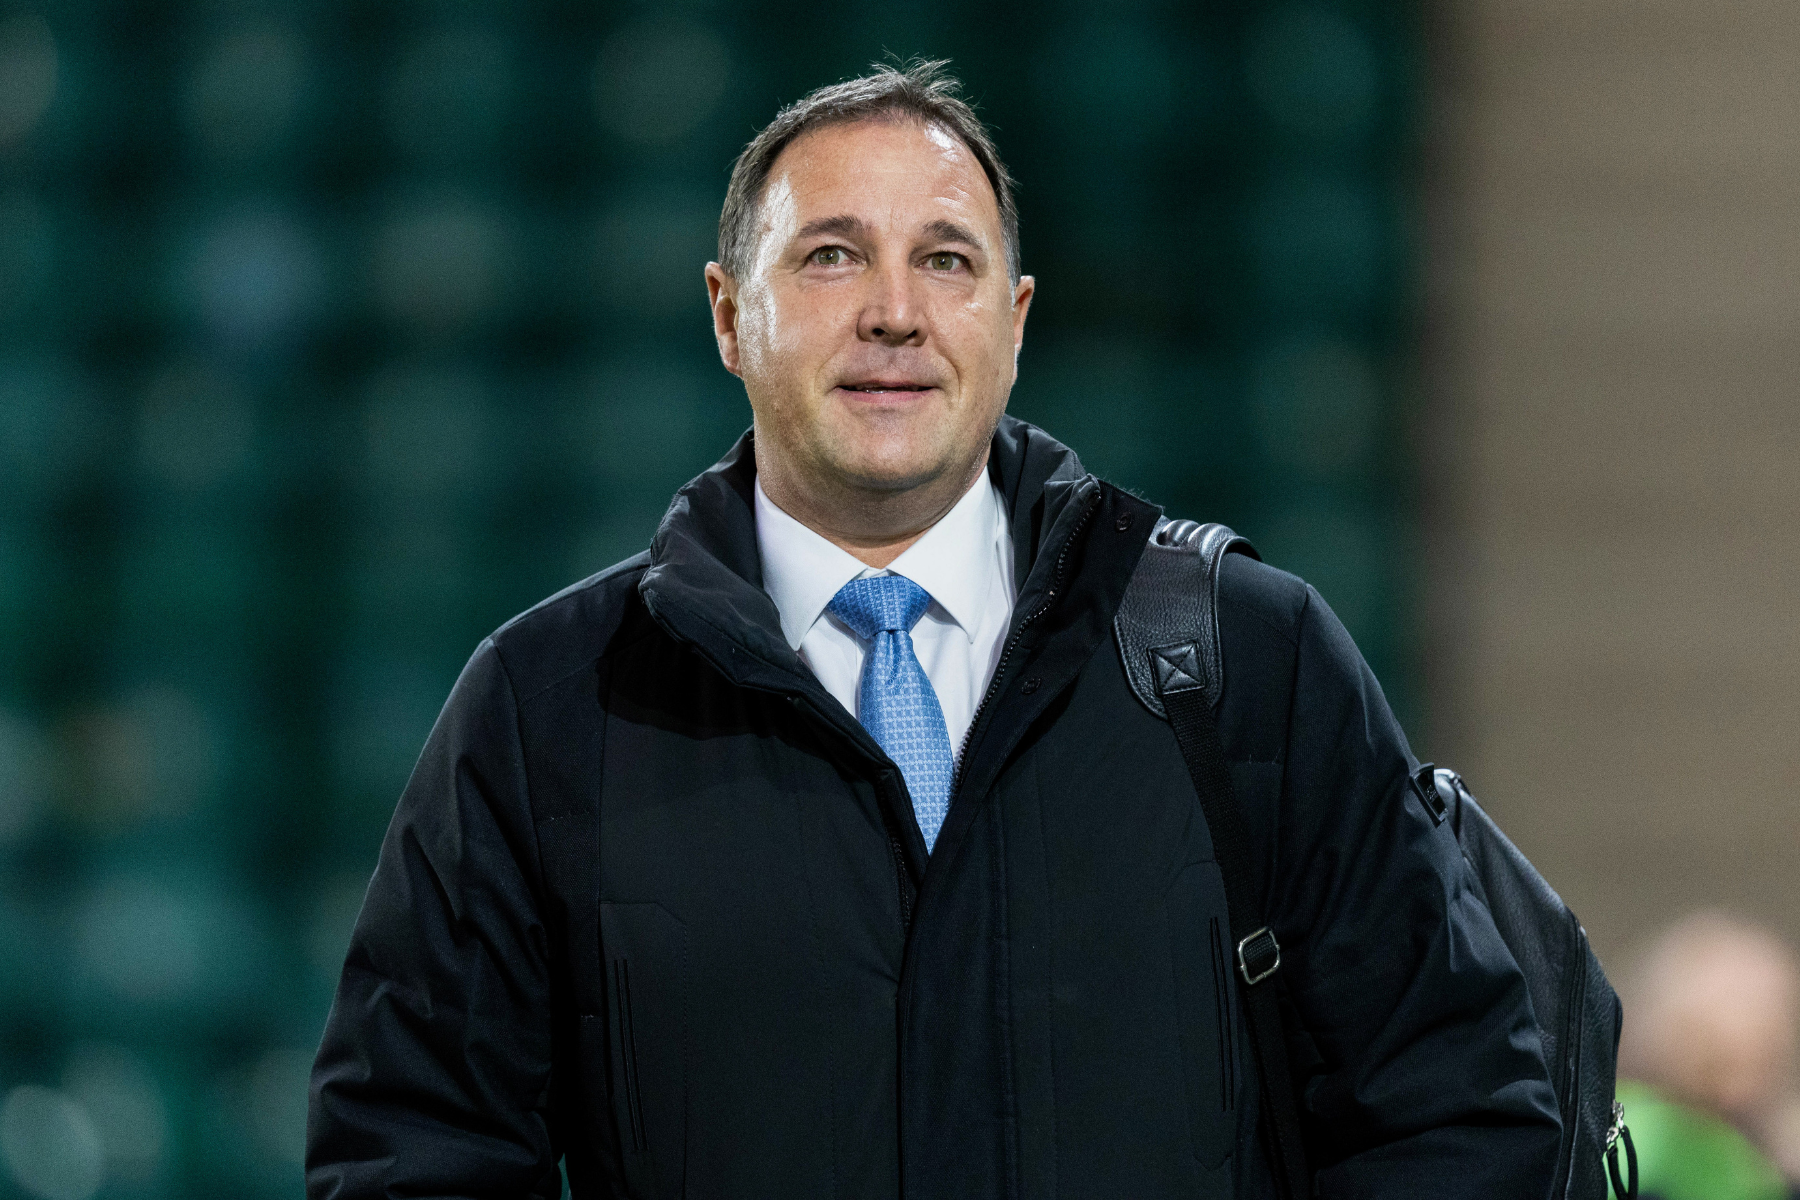 Malky Mackay appointed as new Hibs sporting director